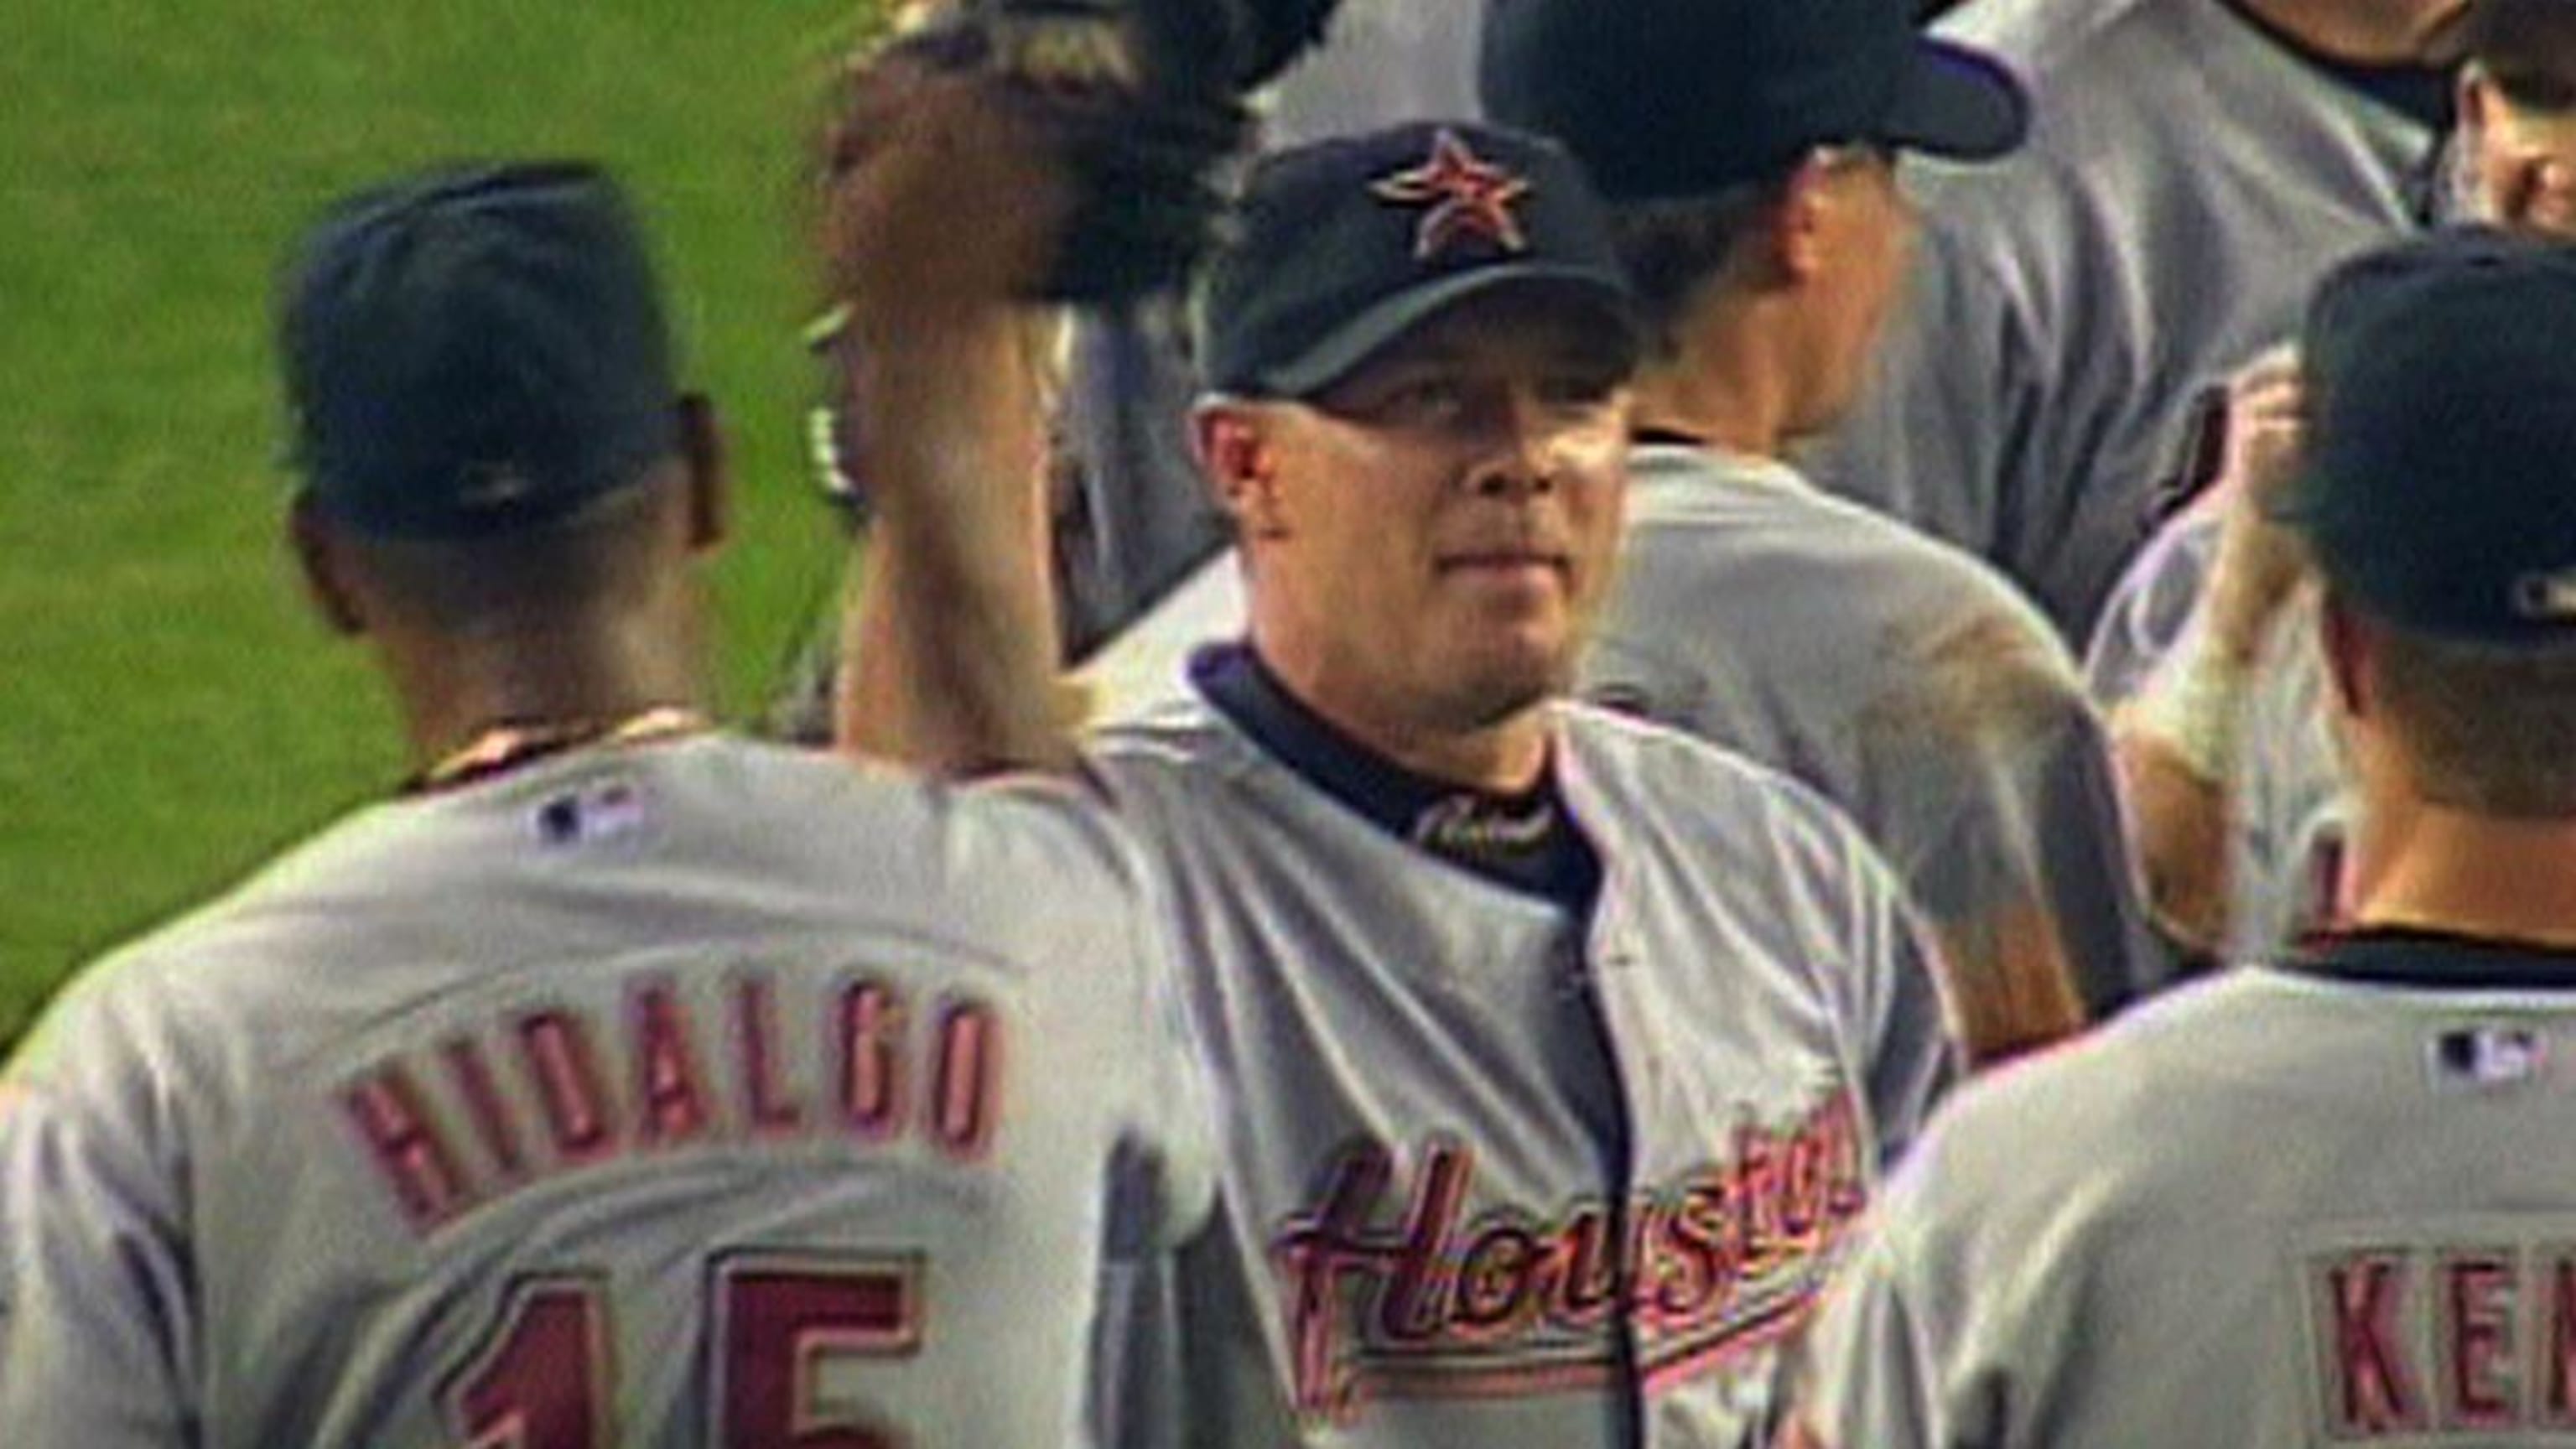 Billy Wagner deserves a shot at the Hall of Fame - Amazin' Avenue